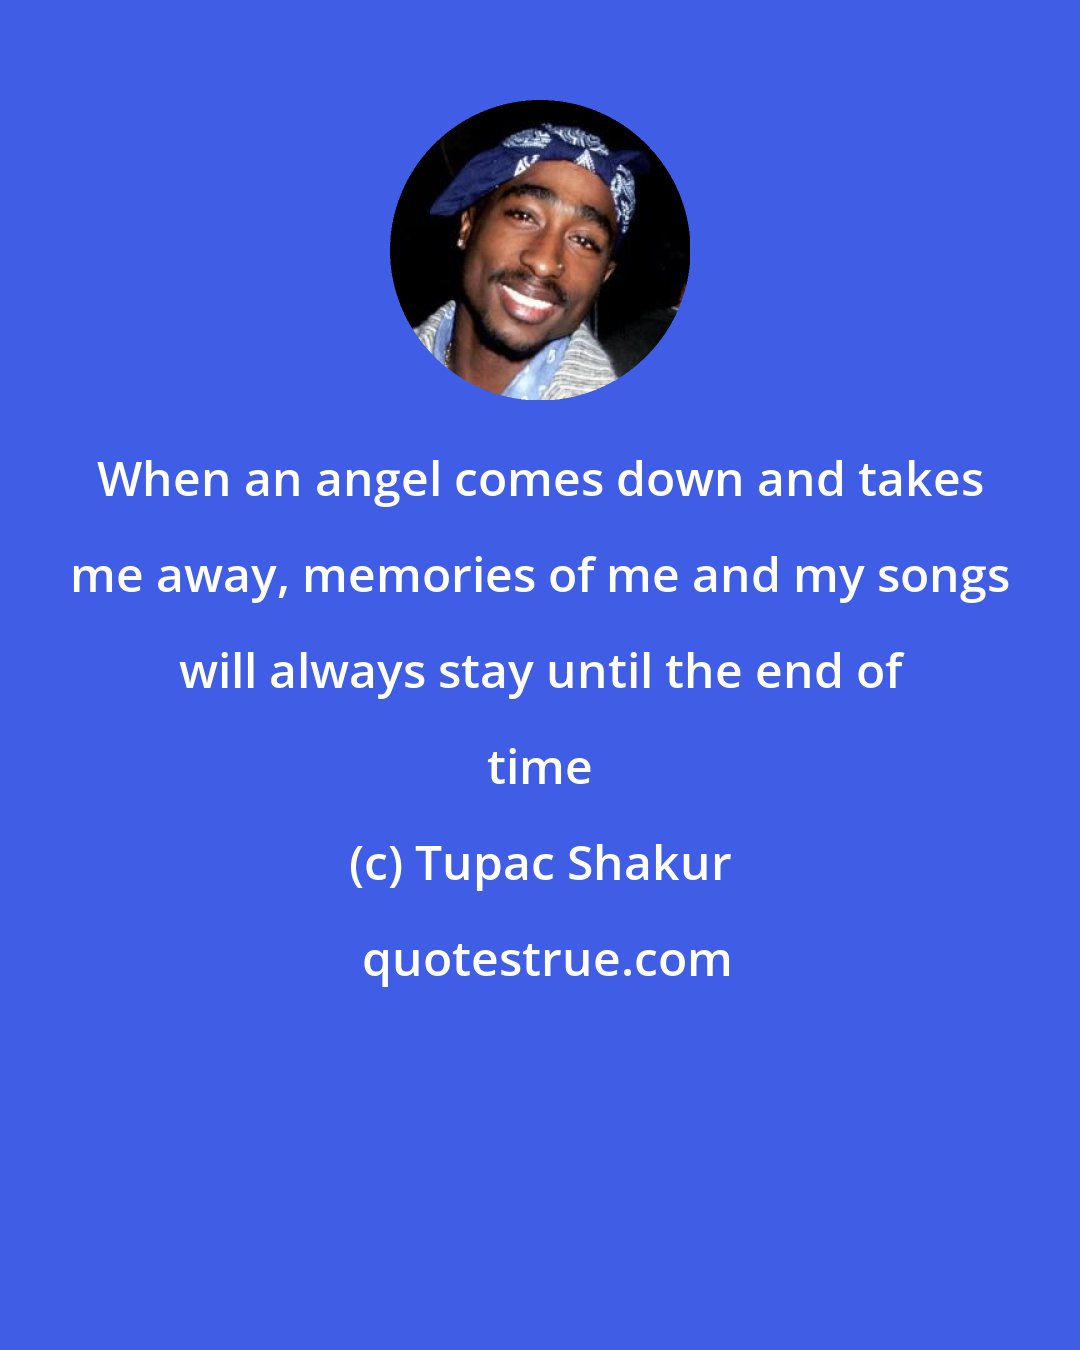 Tupac Shakur: When an angel comes down and takes me away, memories of me and my songs will always stay until the end of time